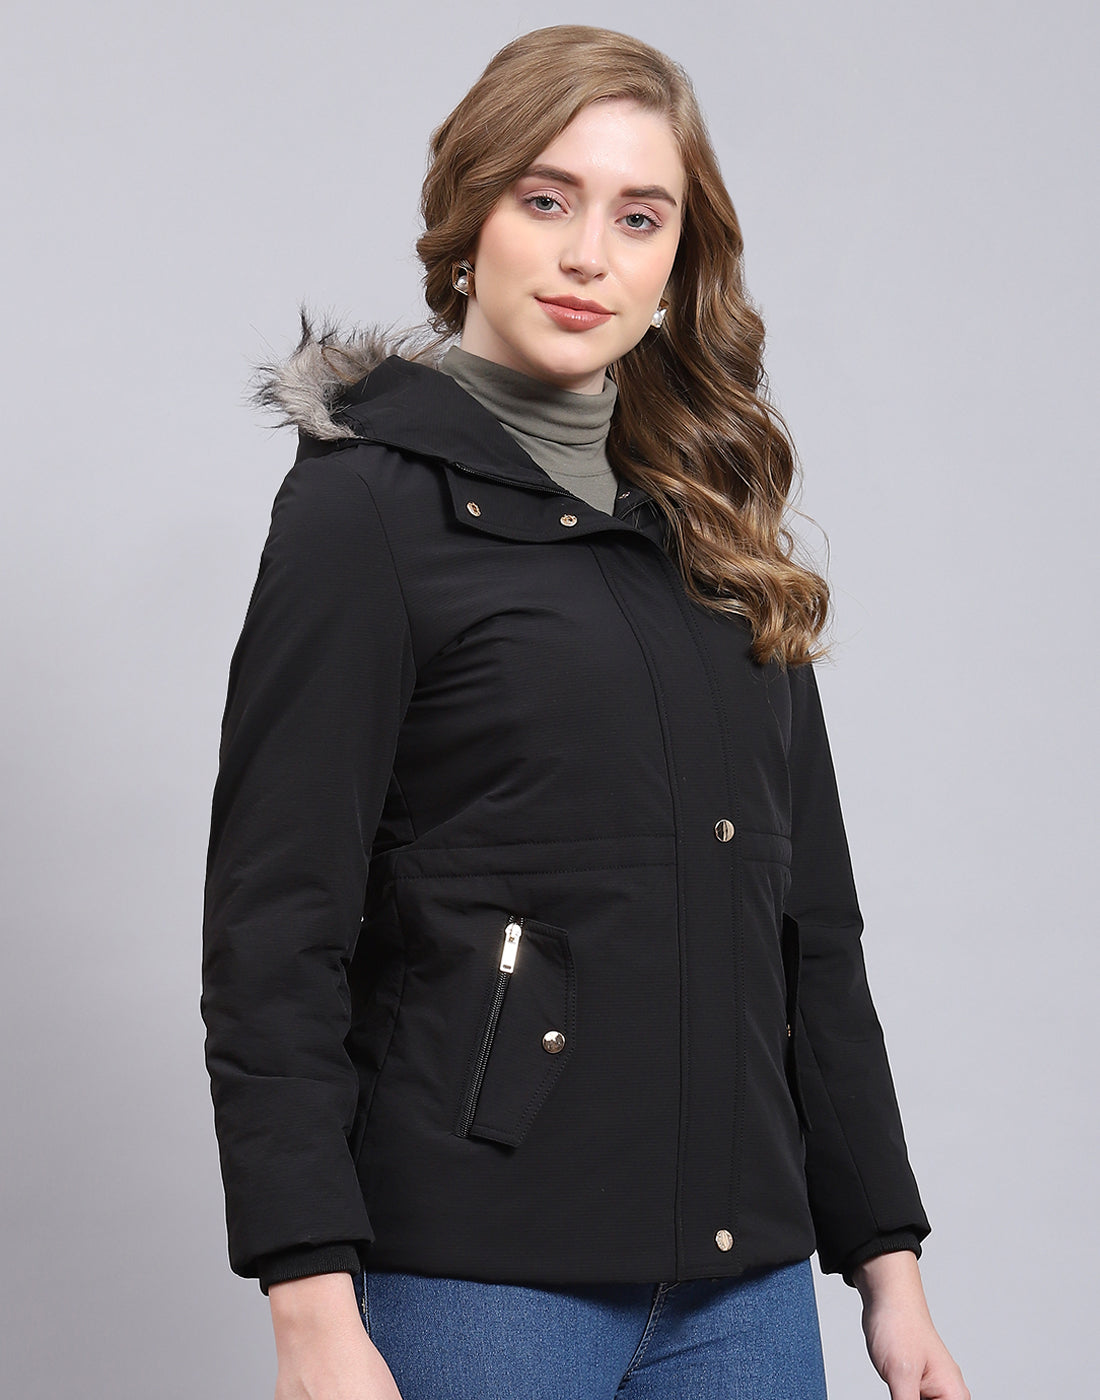 Women Black Hooded Jacket with Attached Inflatable Neck Pillow